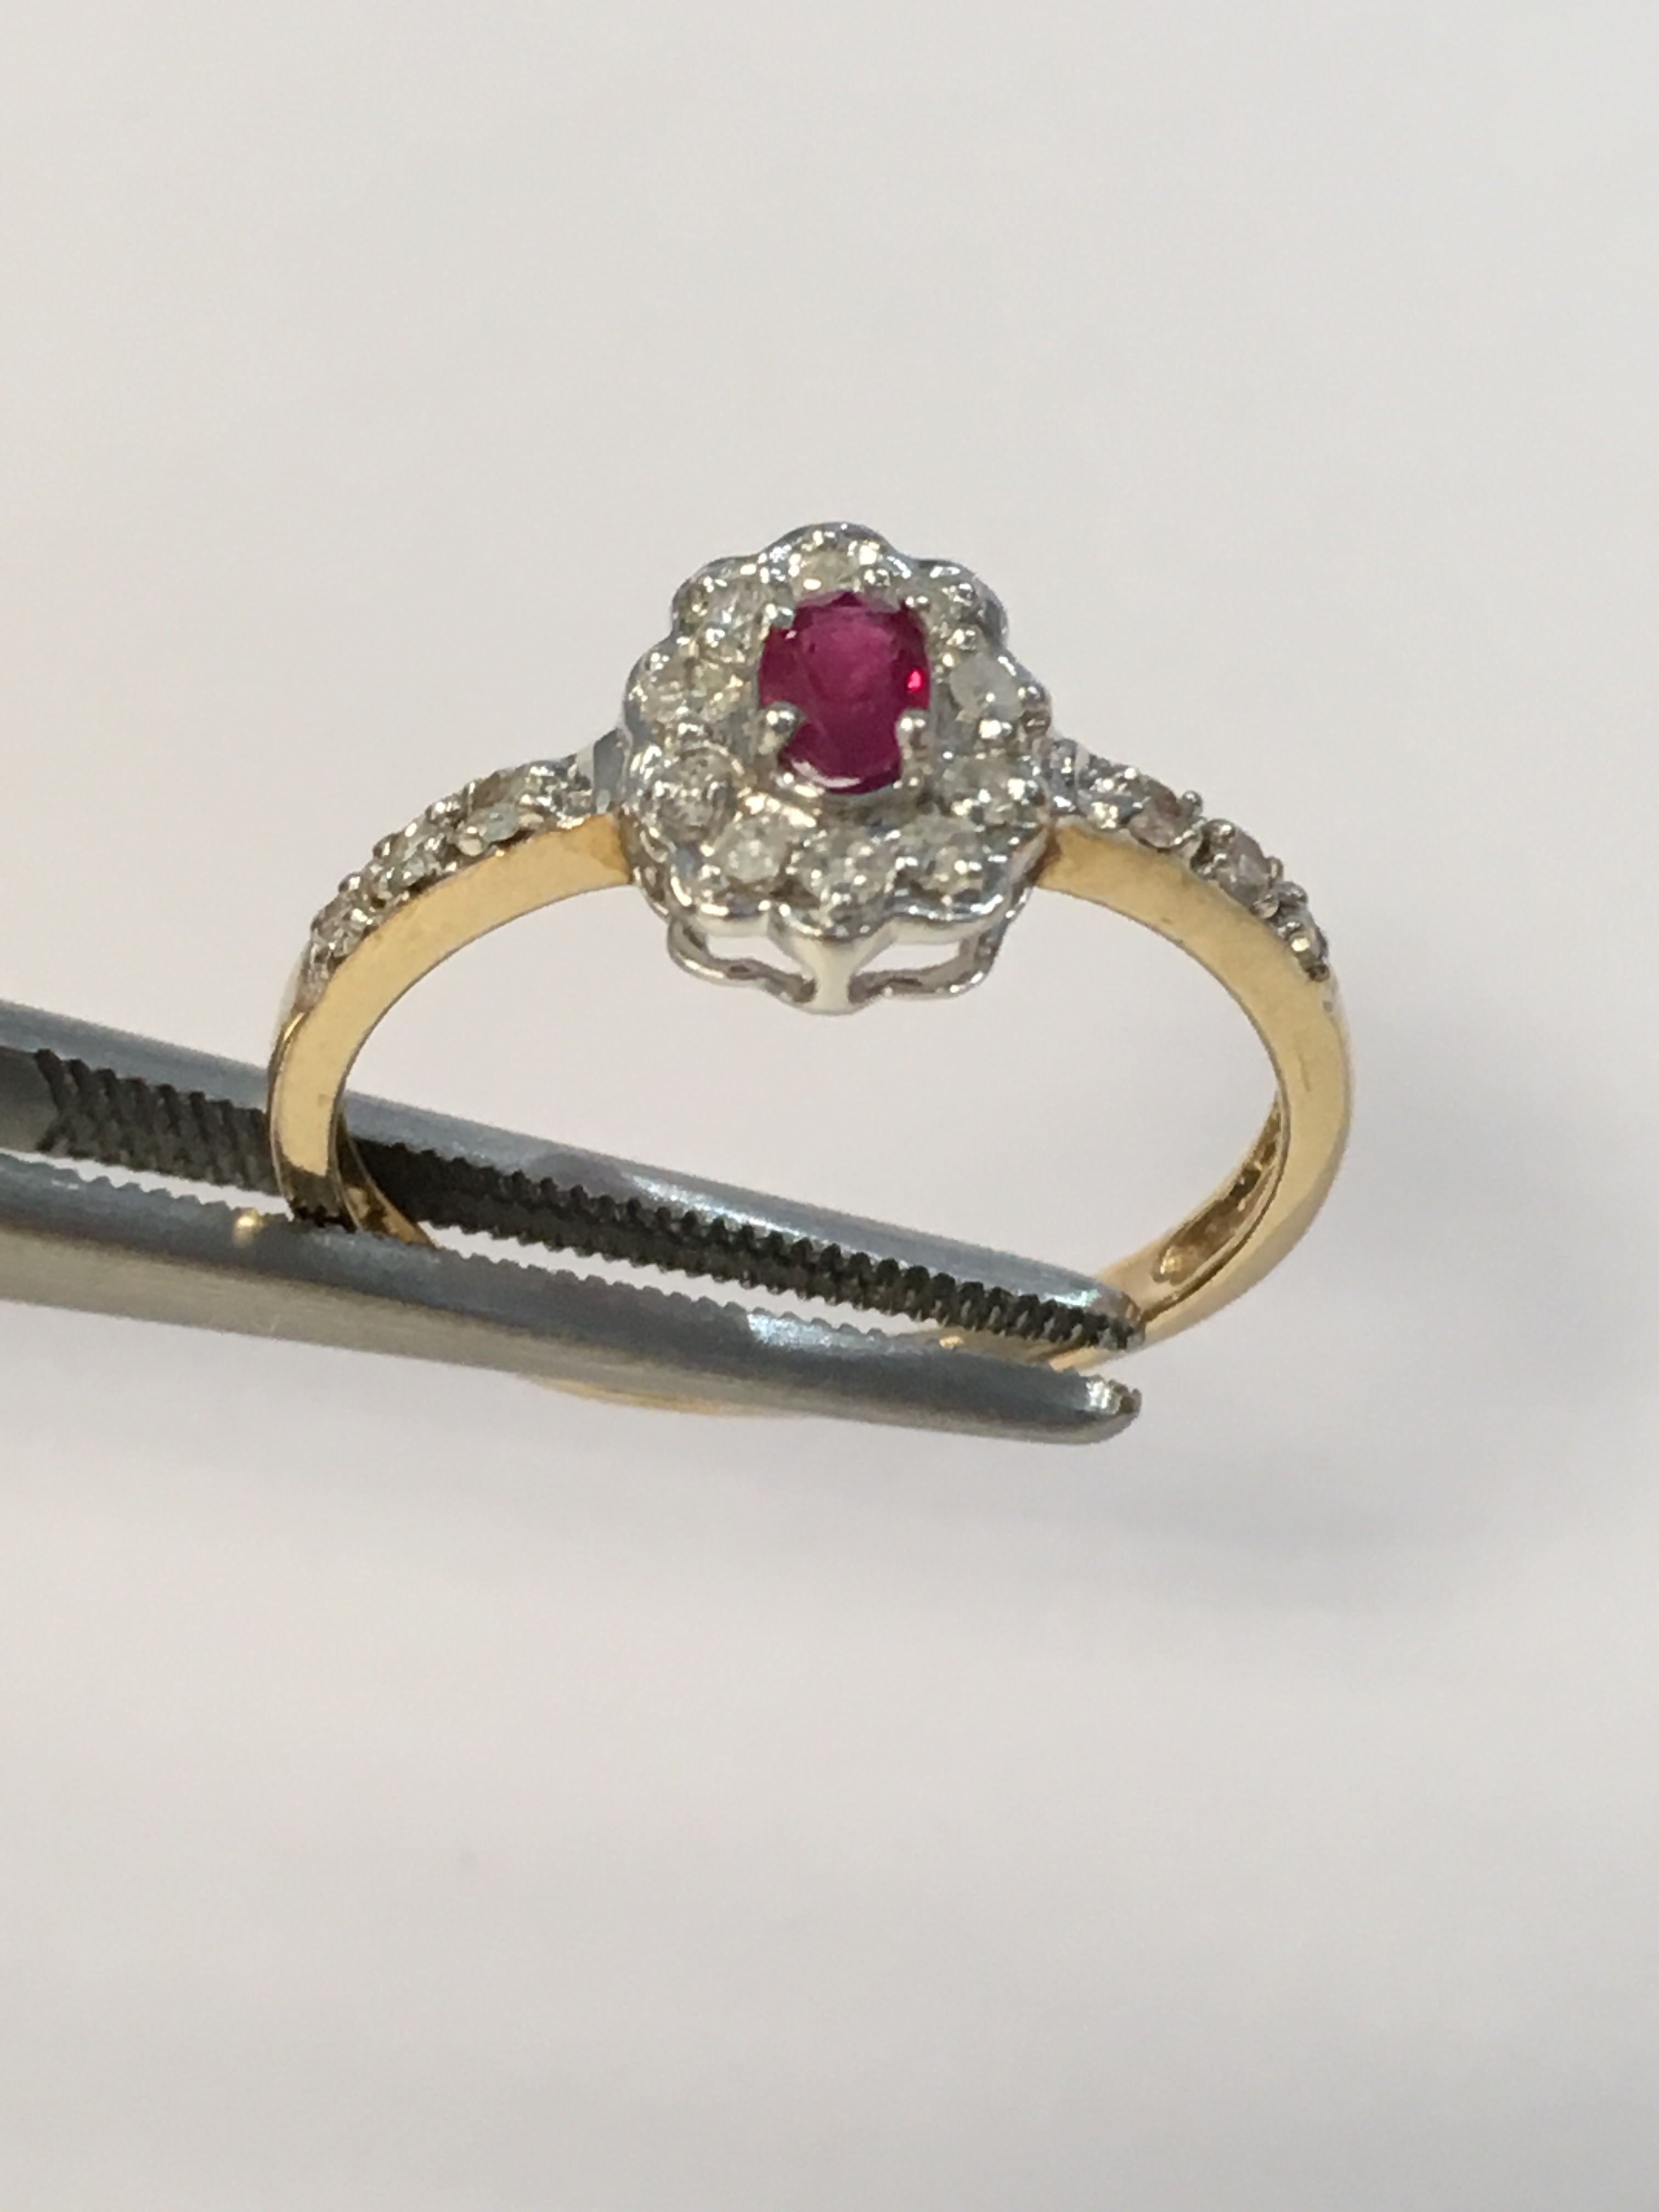 10K Yellow Gold with Burmese Ruby and Cluster Diamonds 0.12ct - Image 2 of 3